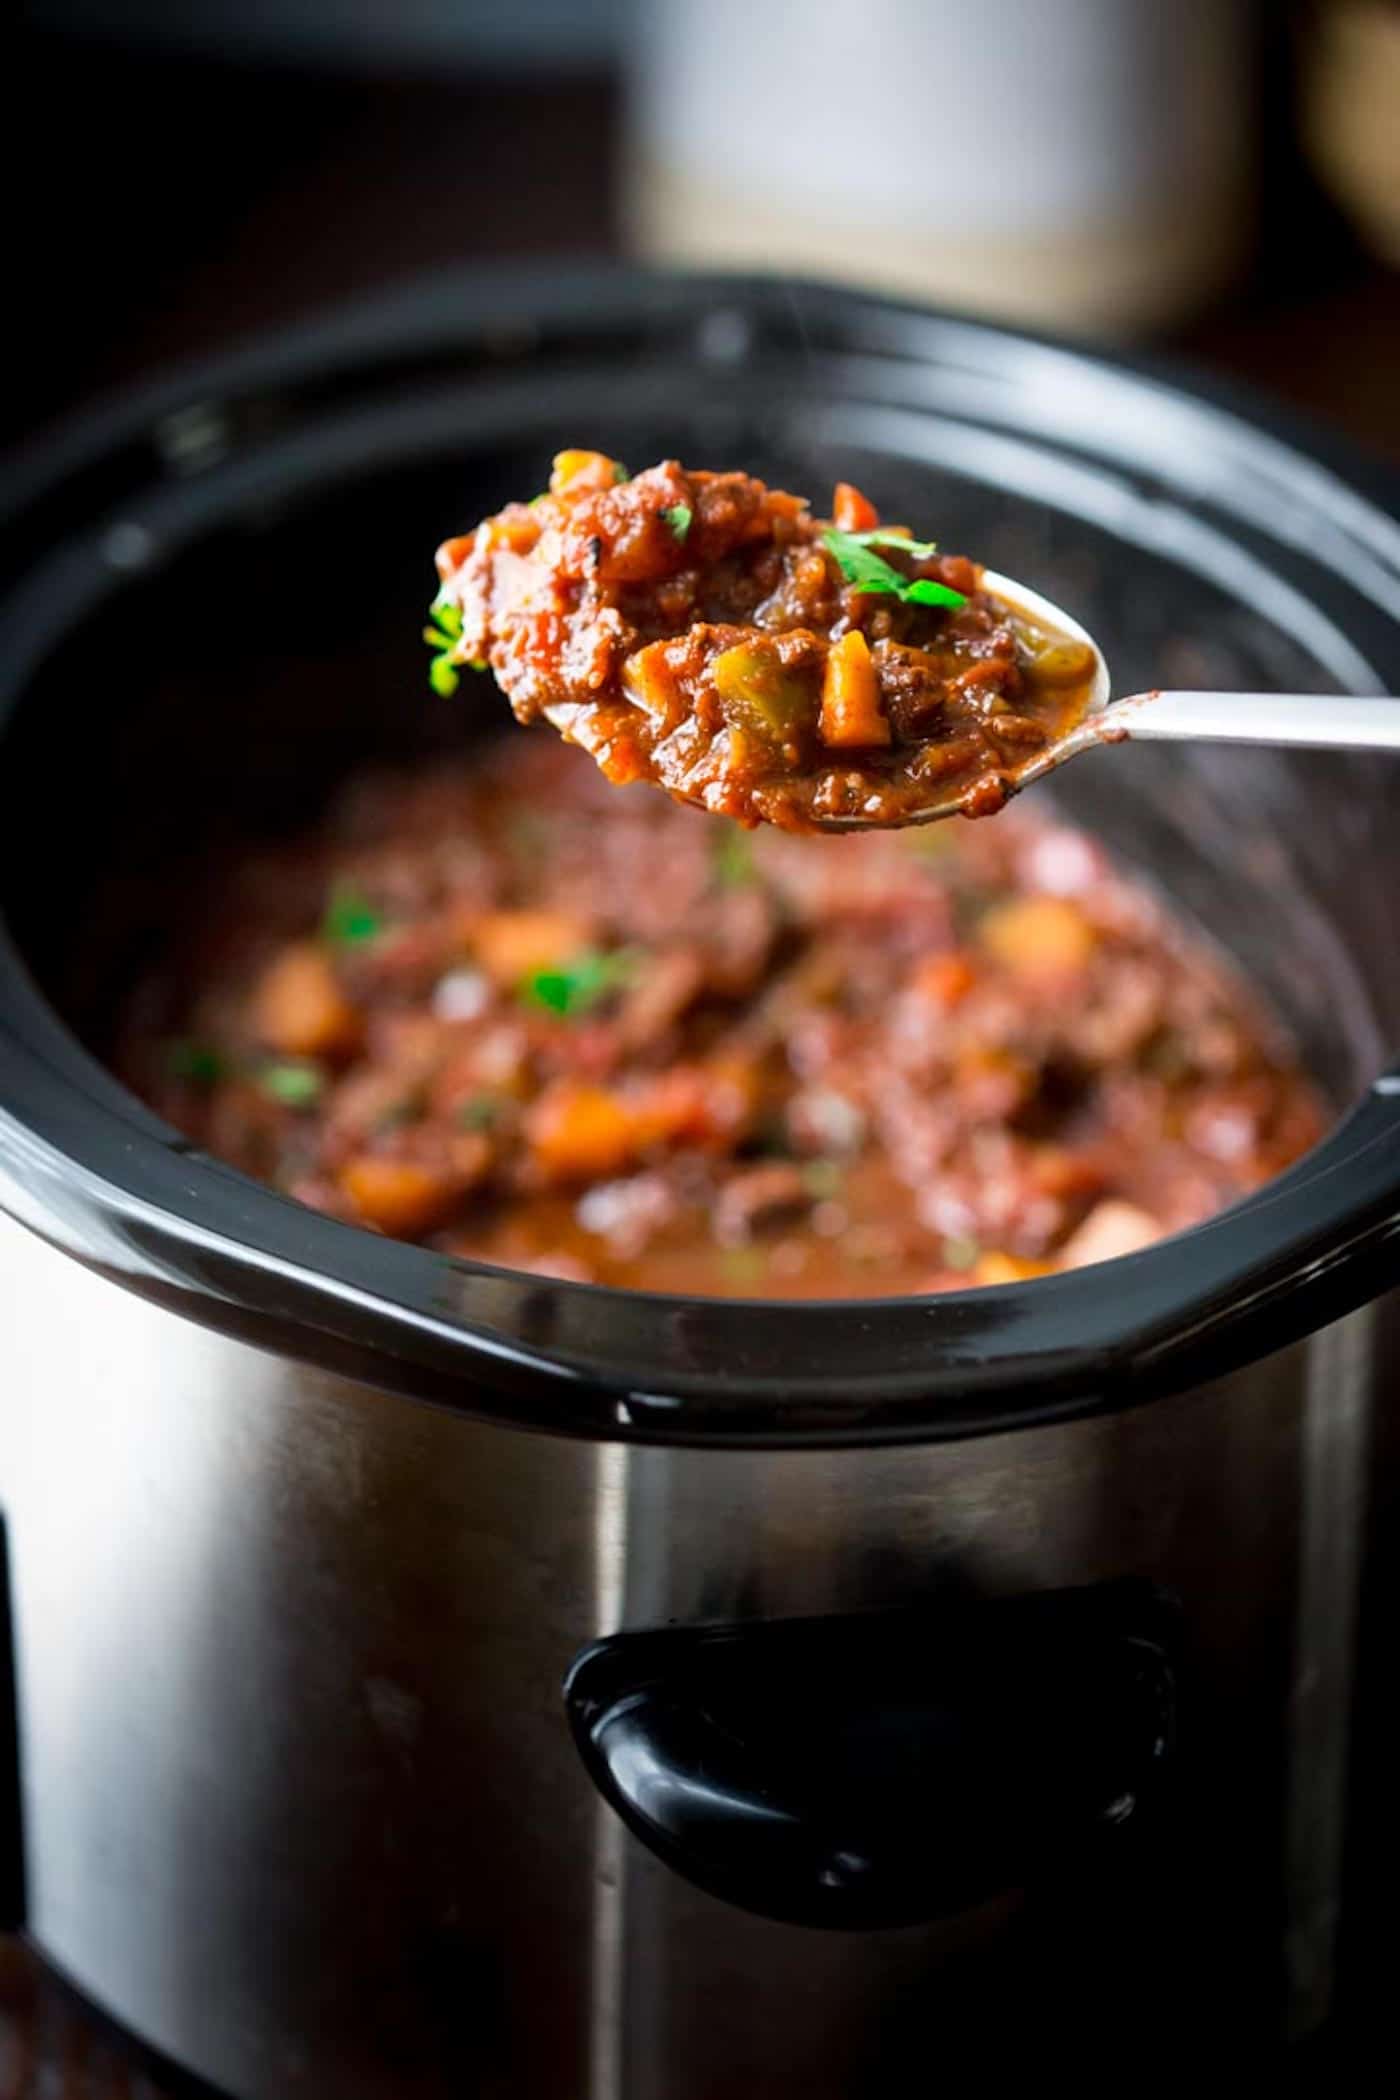 Paleo beef chili is not only easy to make in a slow cooker, but also full of flavor! Loaded with sweet potatoes, beef, spices, tomatoes, and more. It's whole 30 friendly, quick to prep, and pure comfort food. | CotterCrunch.com